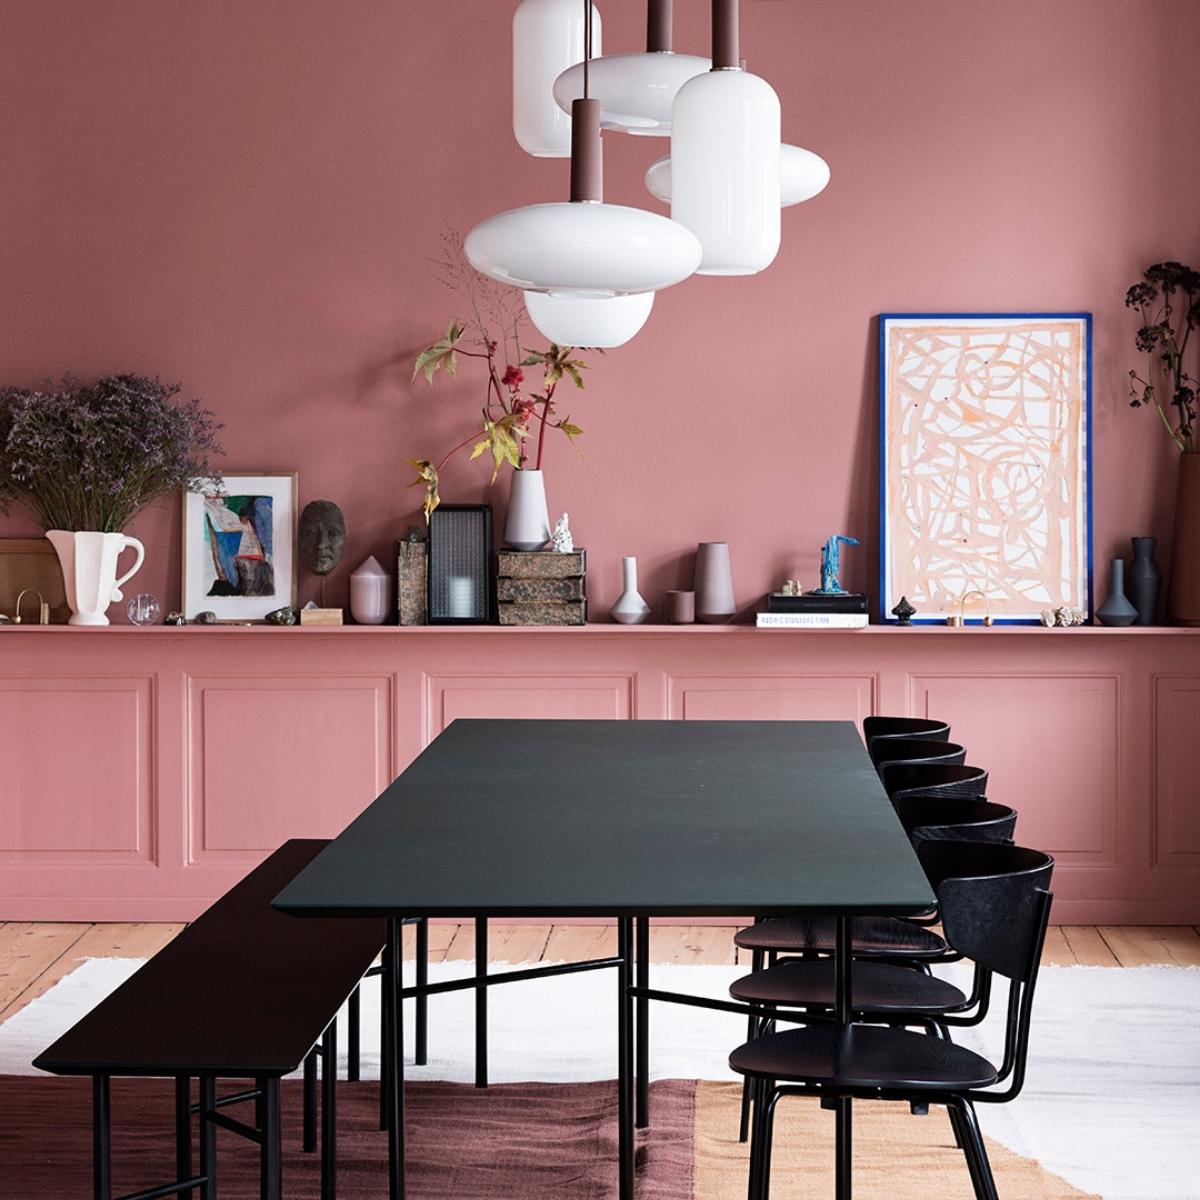 Thursd Feature Genuine Pink Interior Design - How to Add This Trend Color to Your Home